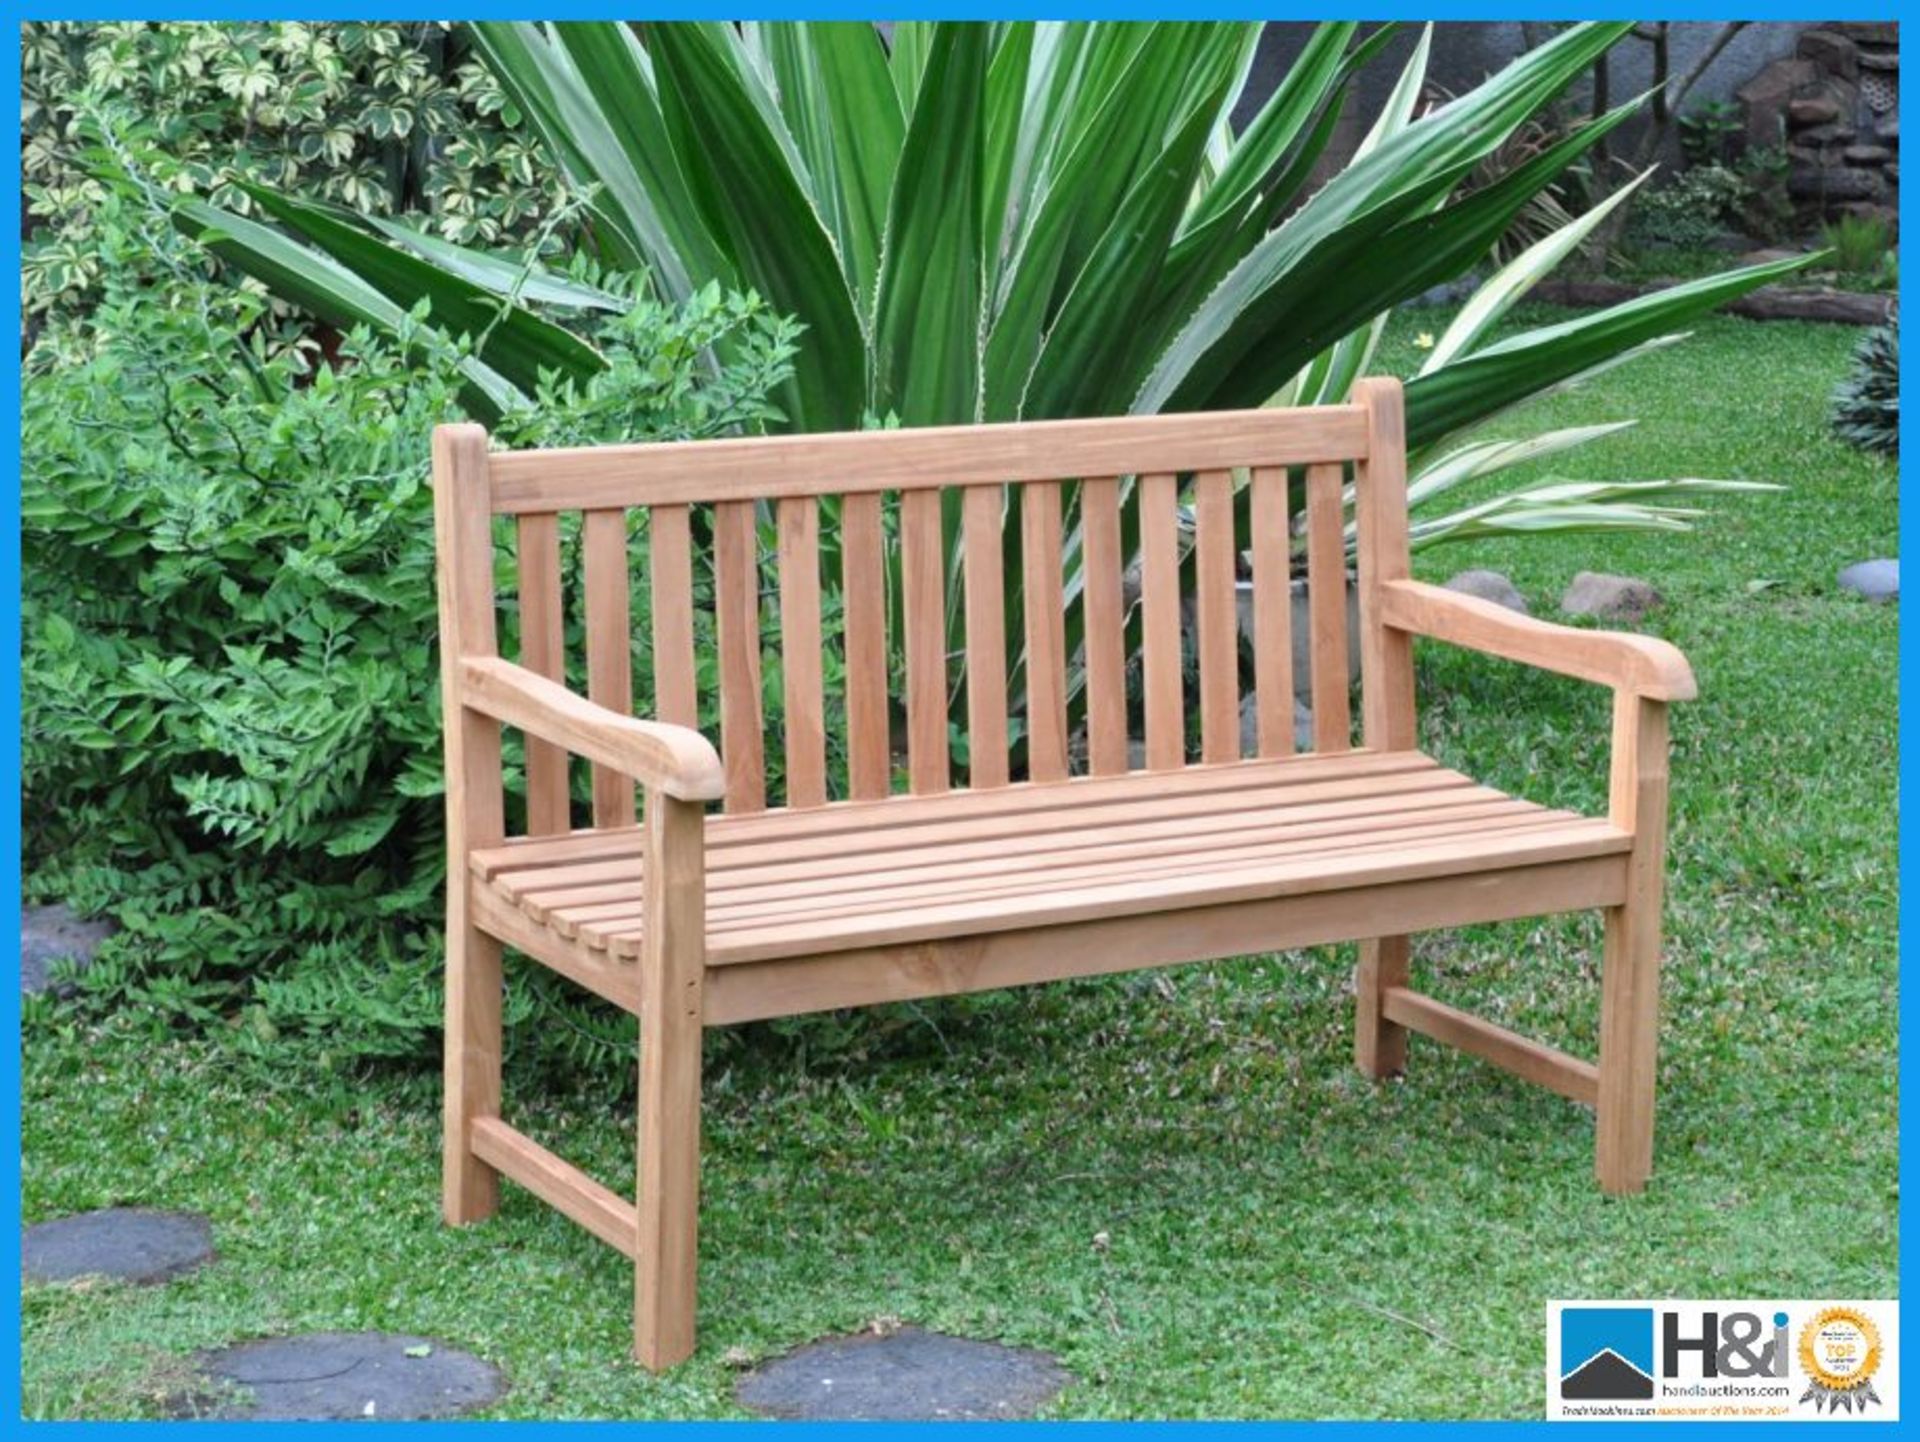 Teak 2 Seat Garden Bench. This solid teak bench will give a beautiful and elegant look to any Garden